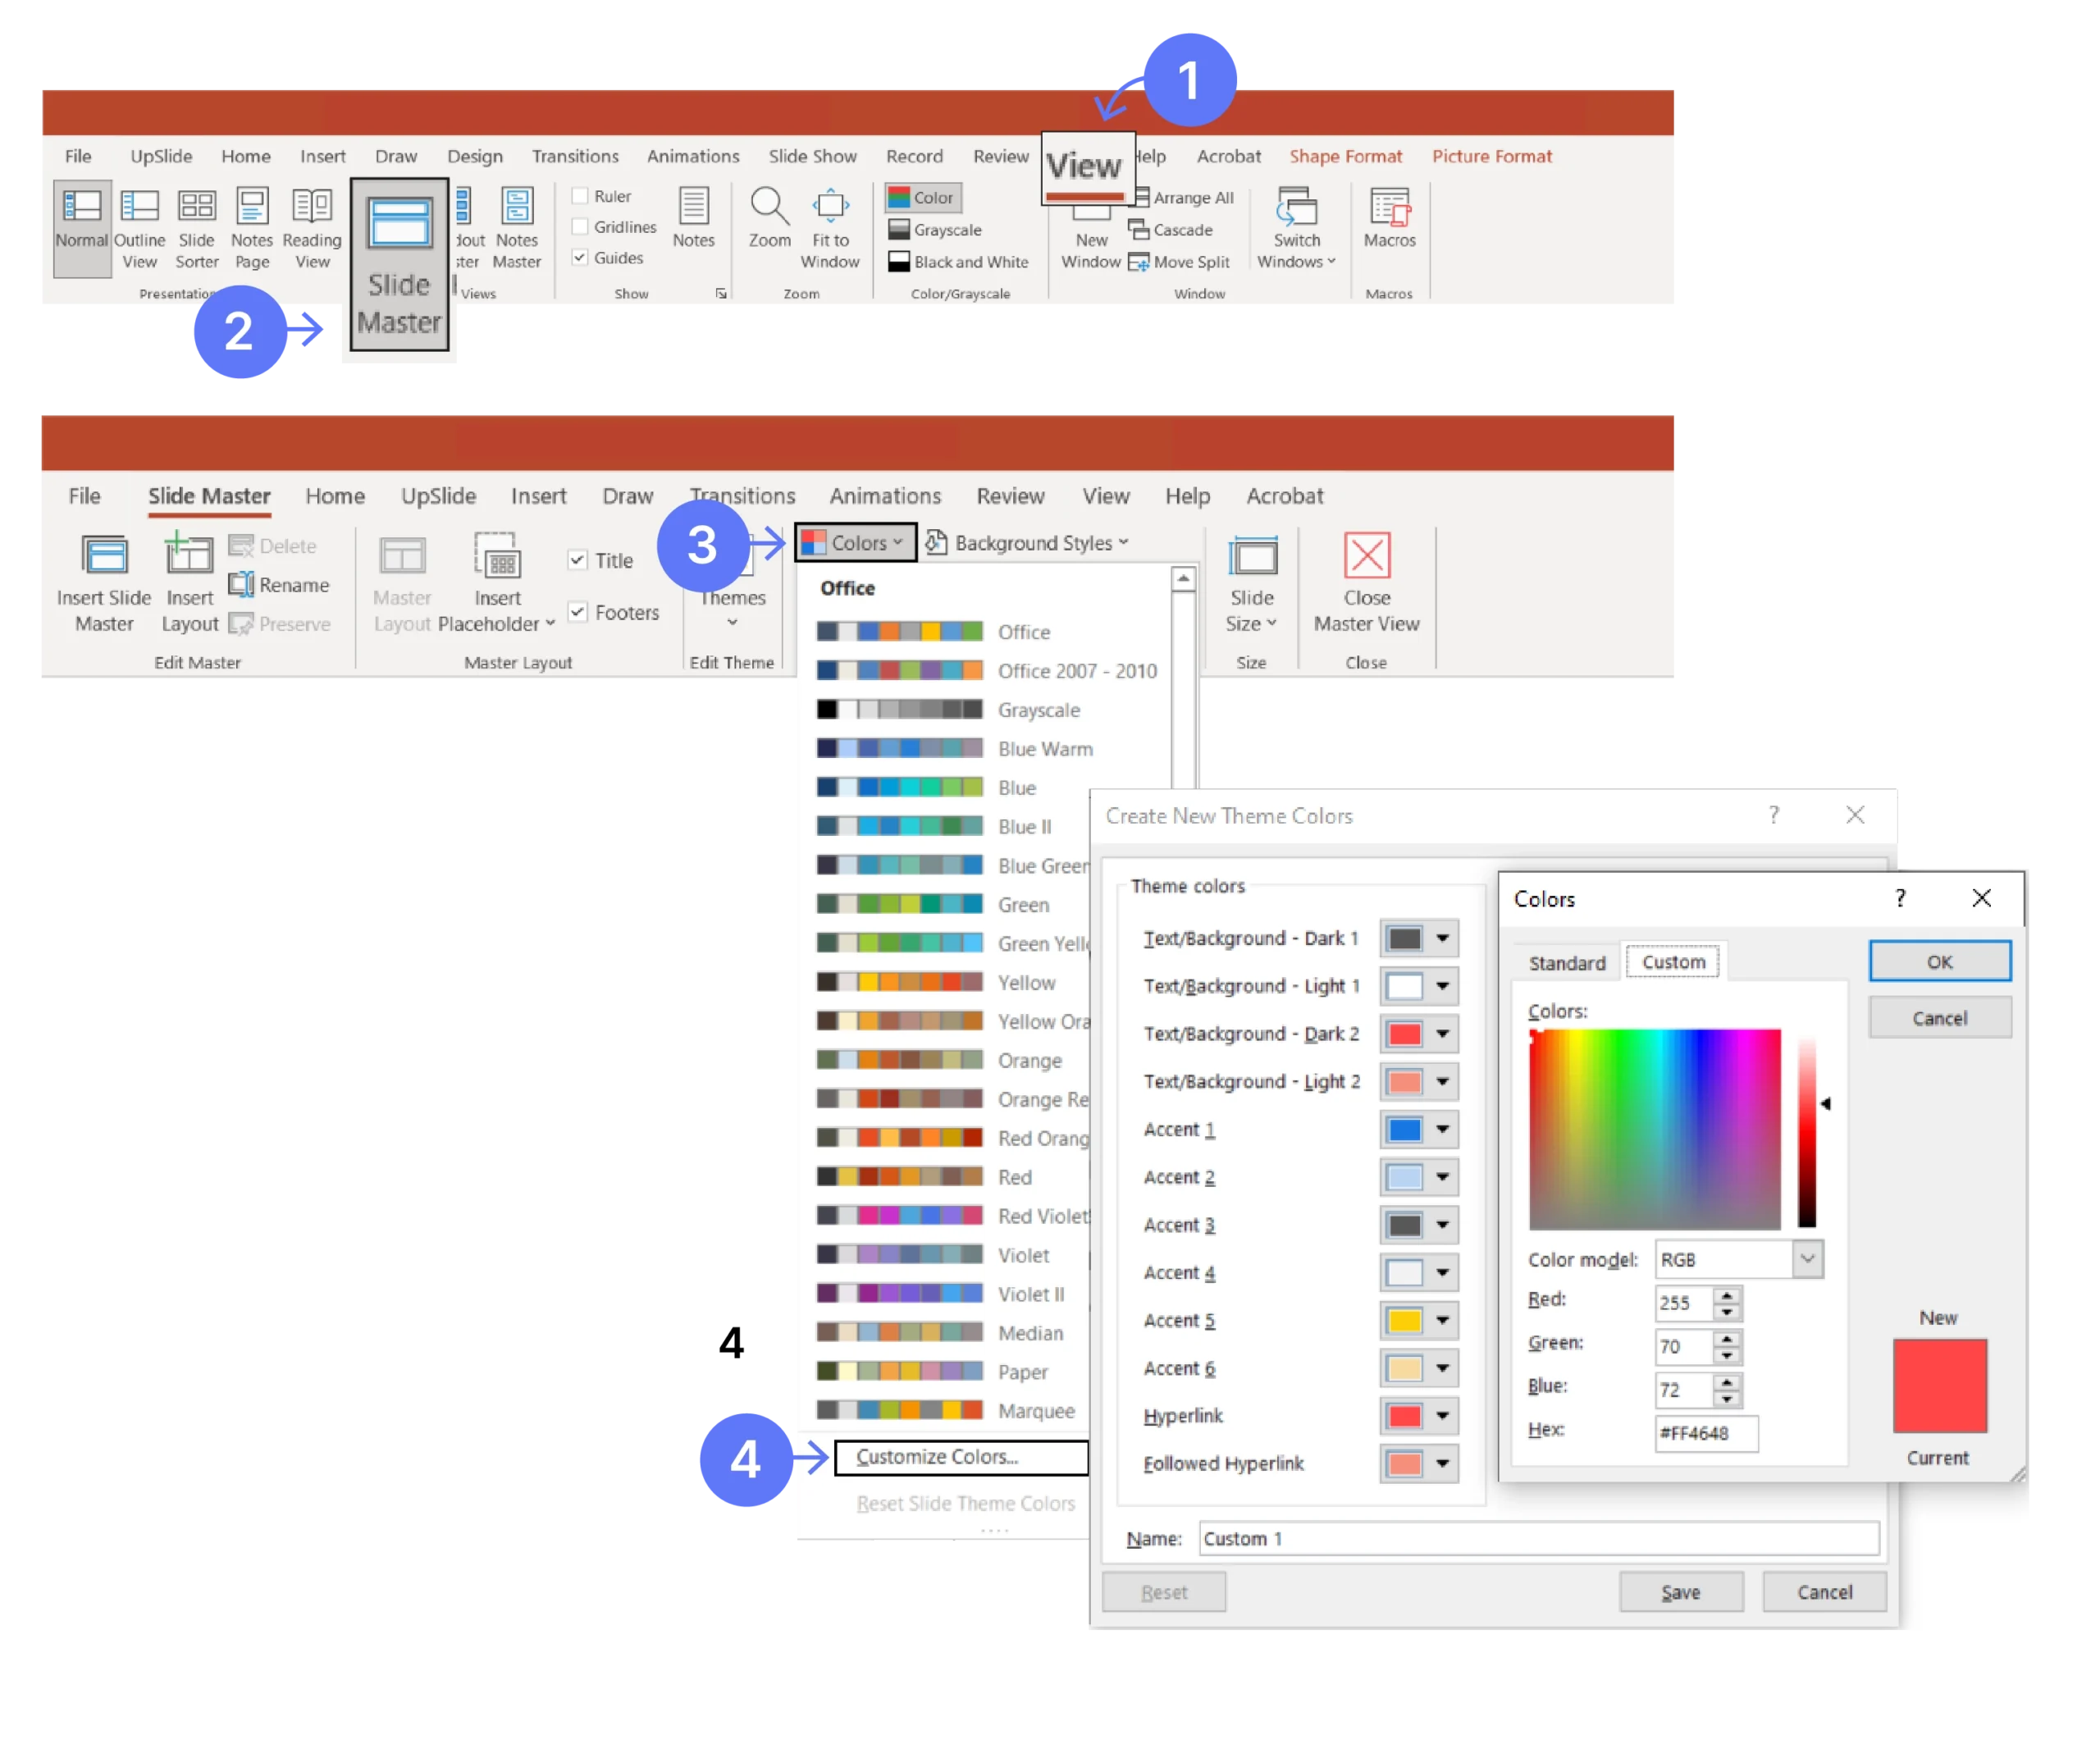 How to customize colors in PowerPoint